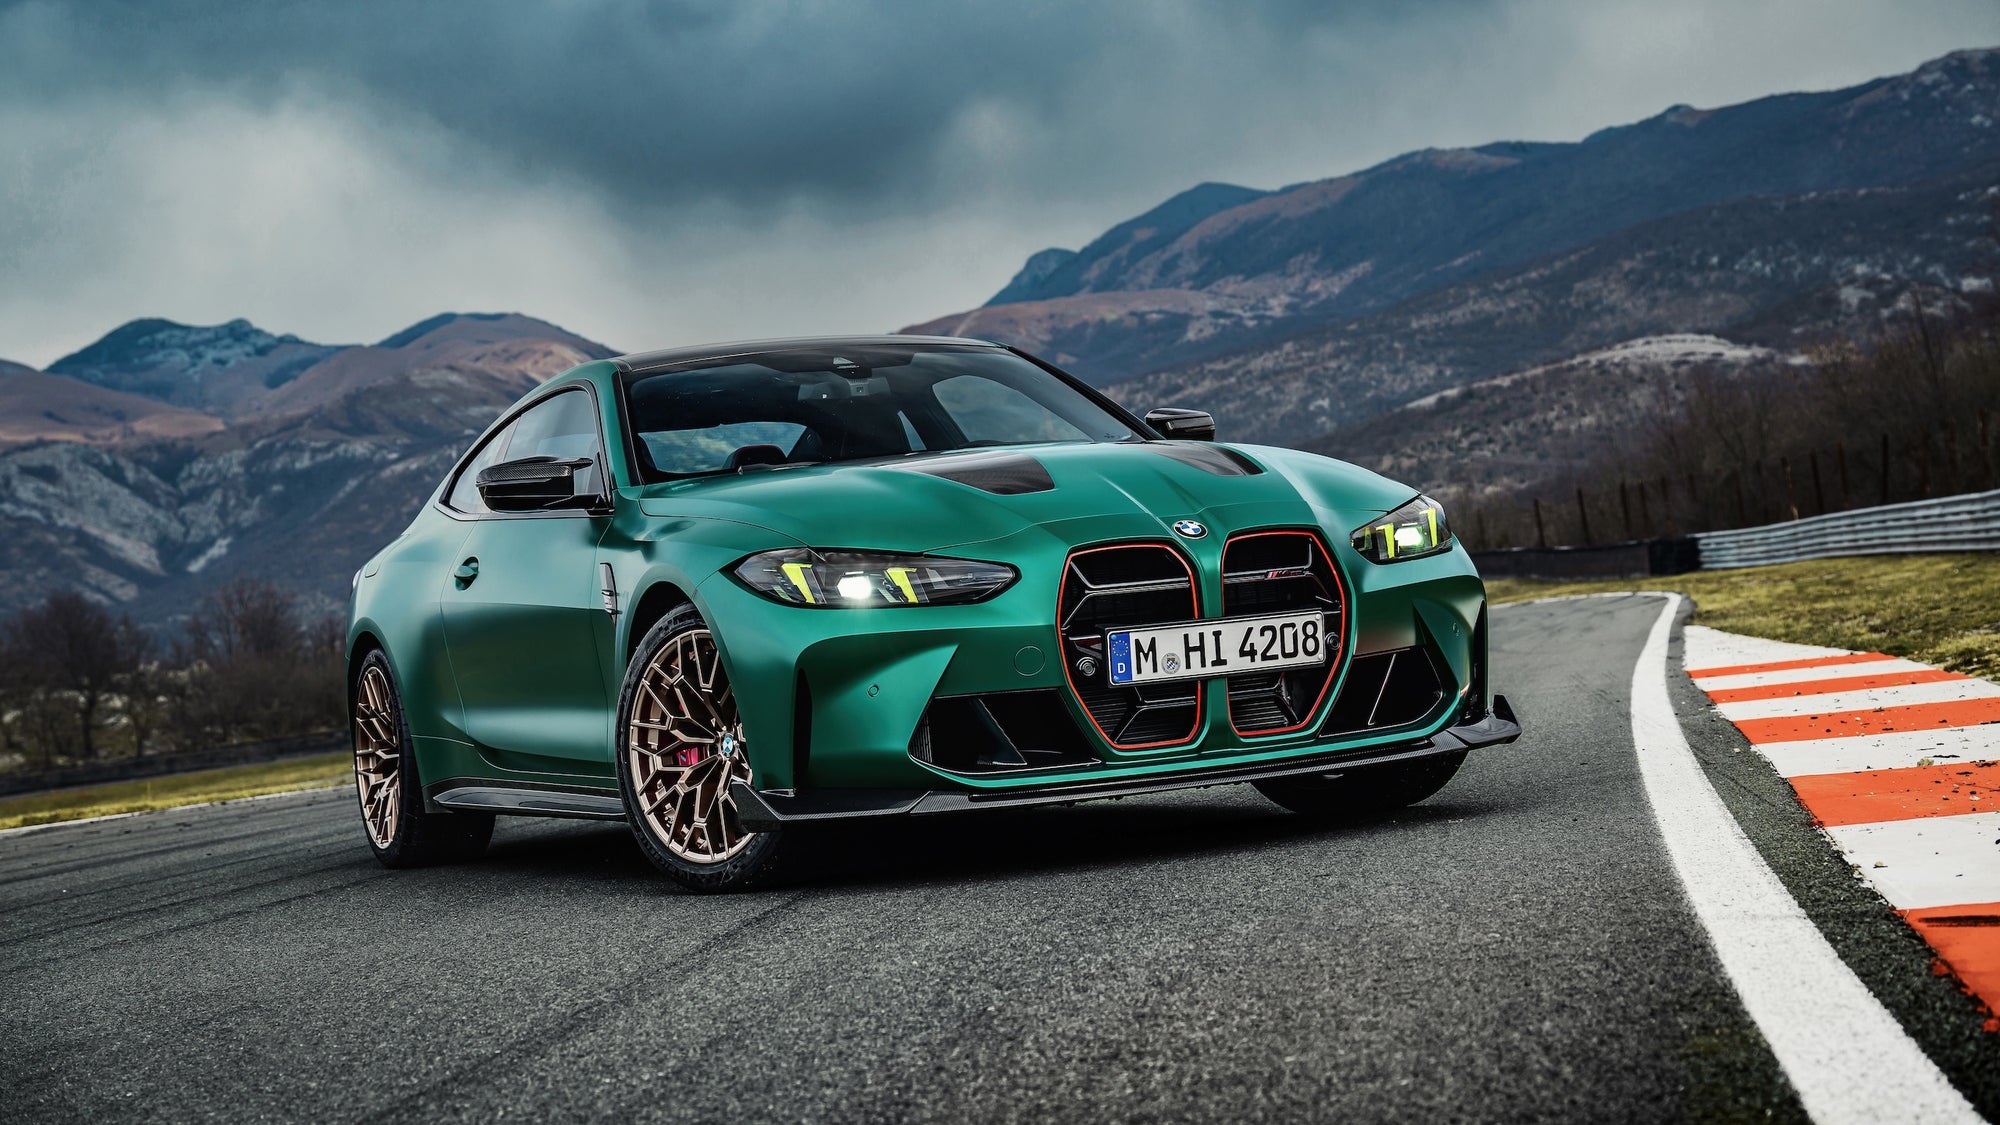 In 2025, the BMW M4 CS is the quickest accelerating M4 in the lineup.